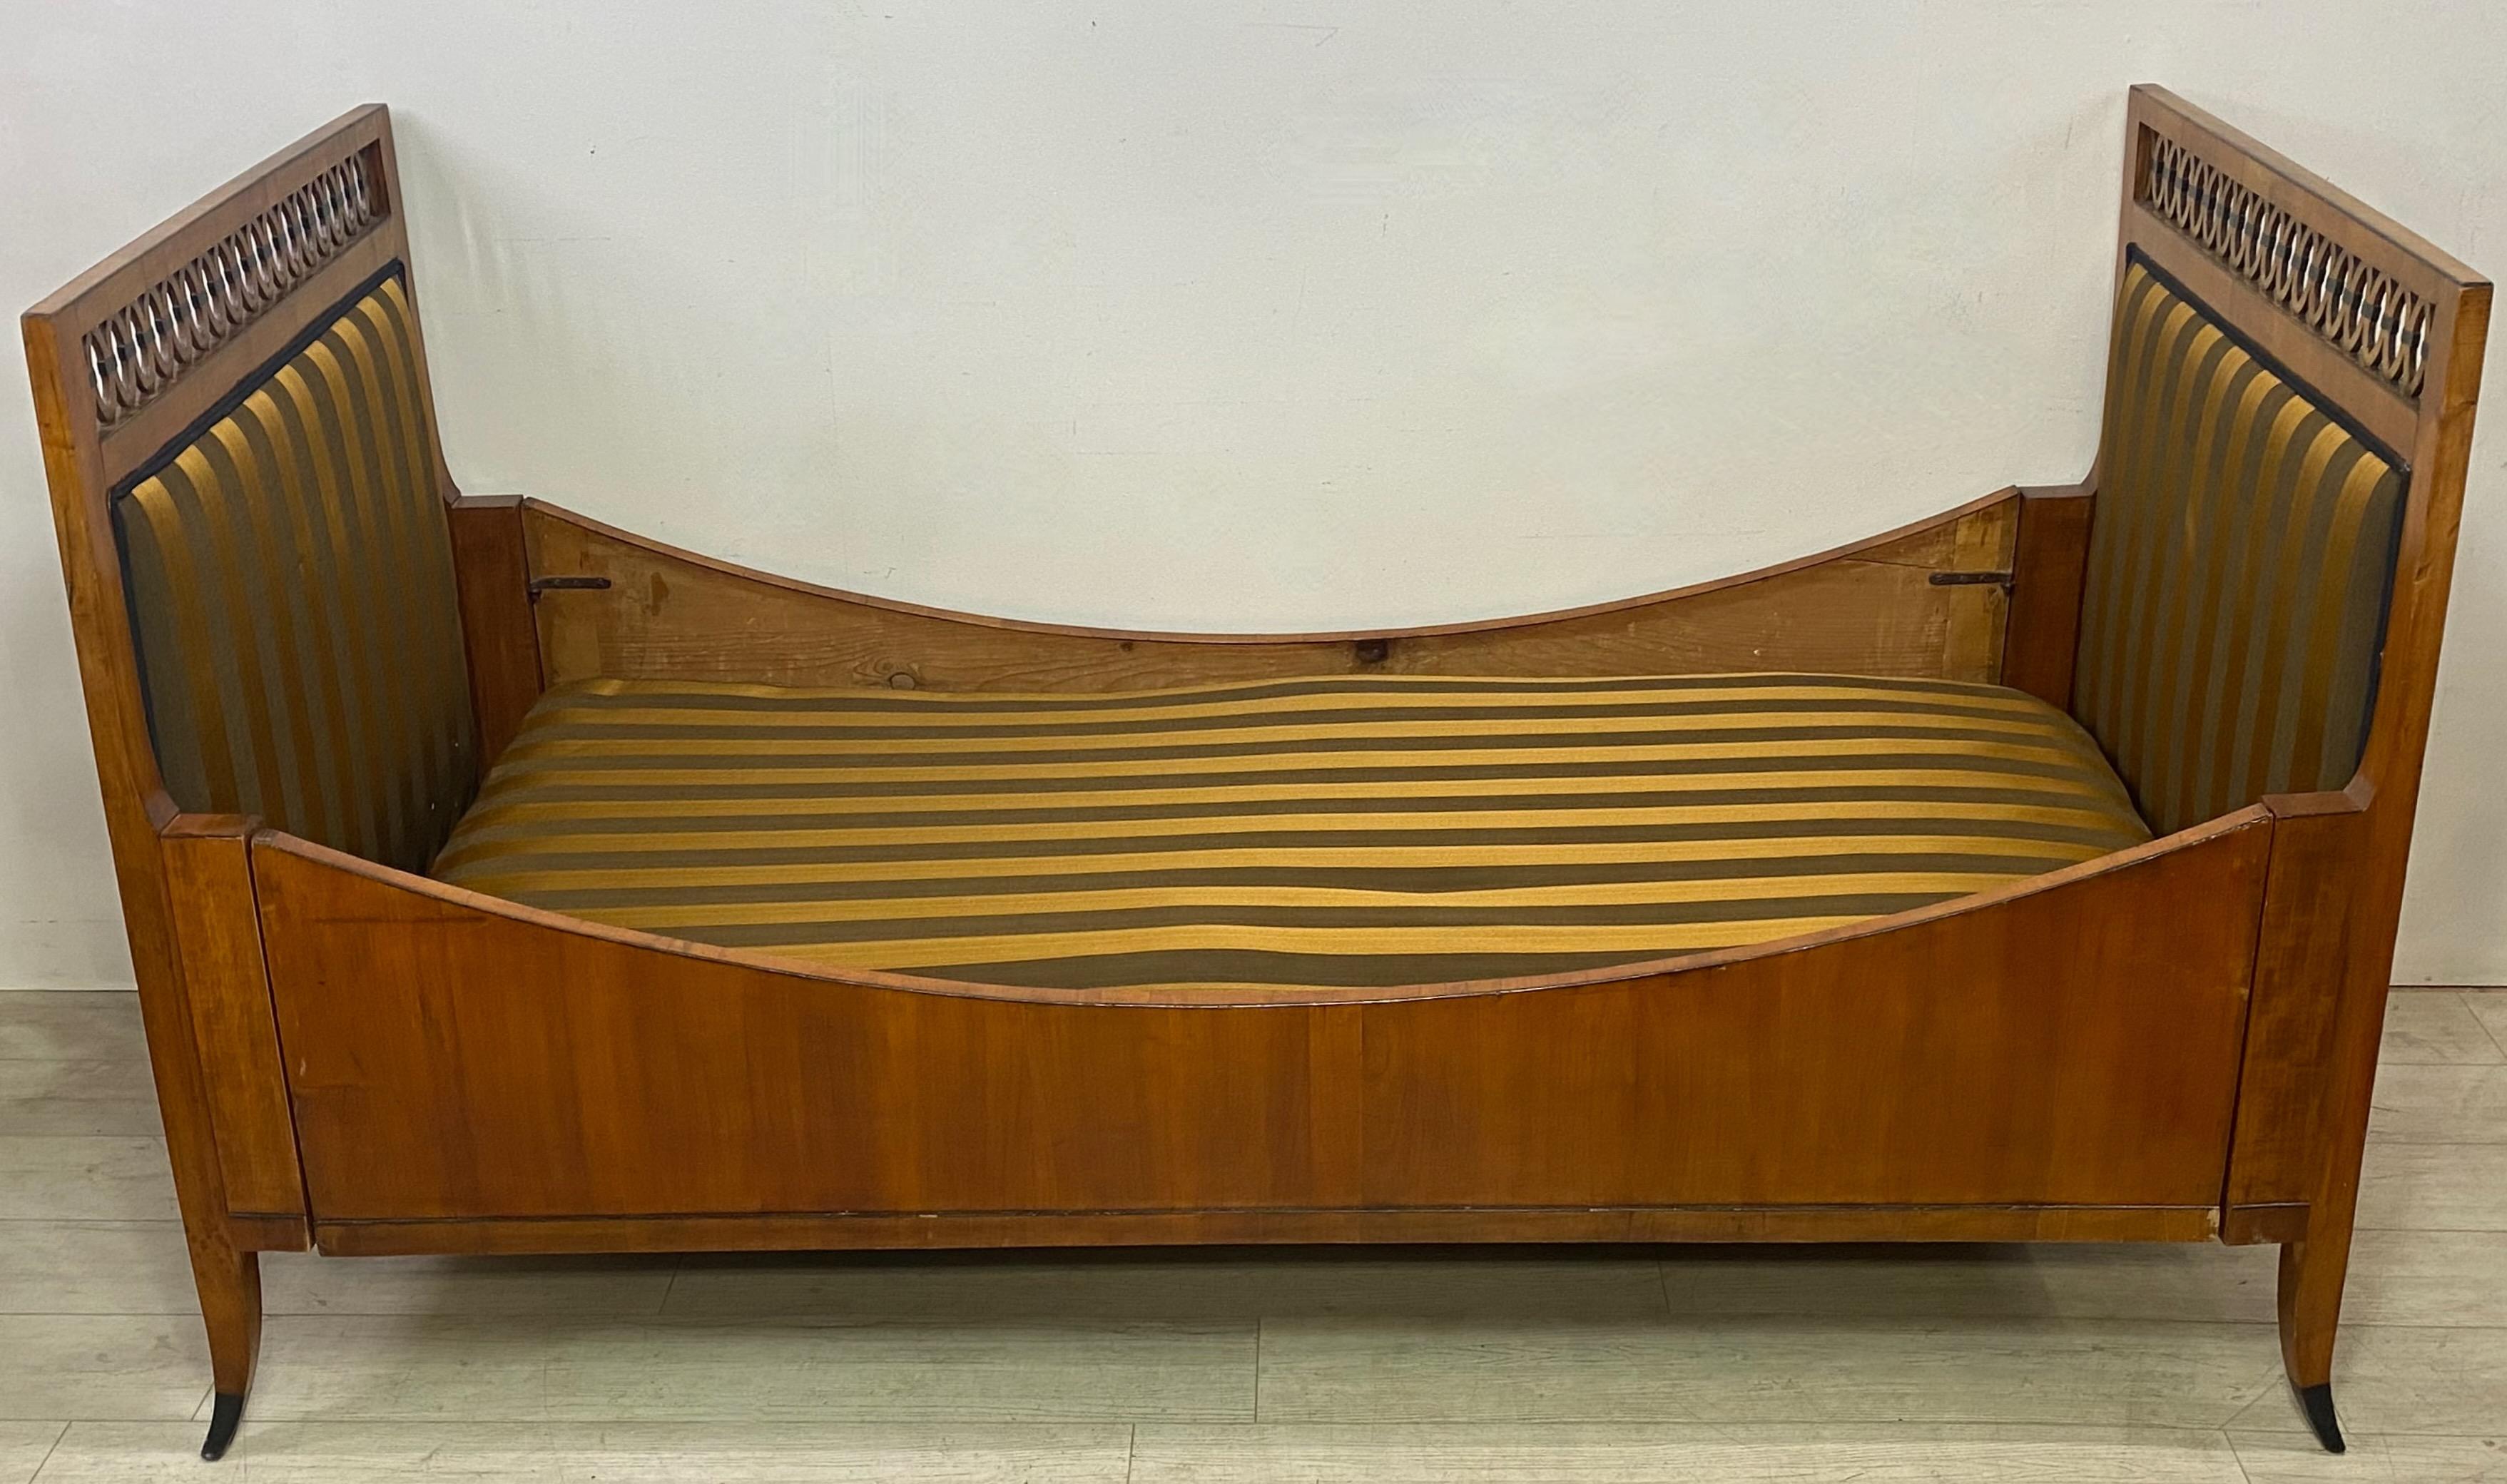 A genuine Biedermeier style daybed, cherrywood with ebonized detail.
The custom made McRoskey mattress is a standard twin size. The mattress could use a simple made box or platform to lift it 1.25 to 4 inches if desired.
Beautiful old finish, in